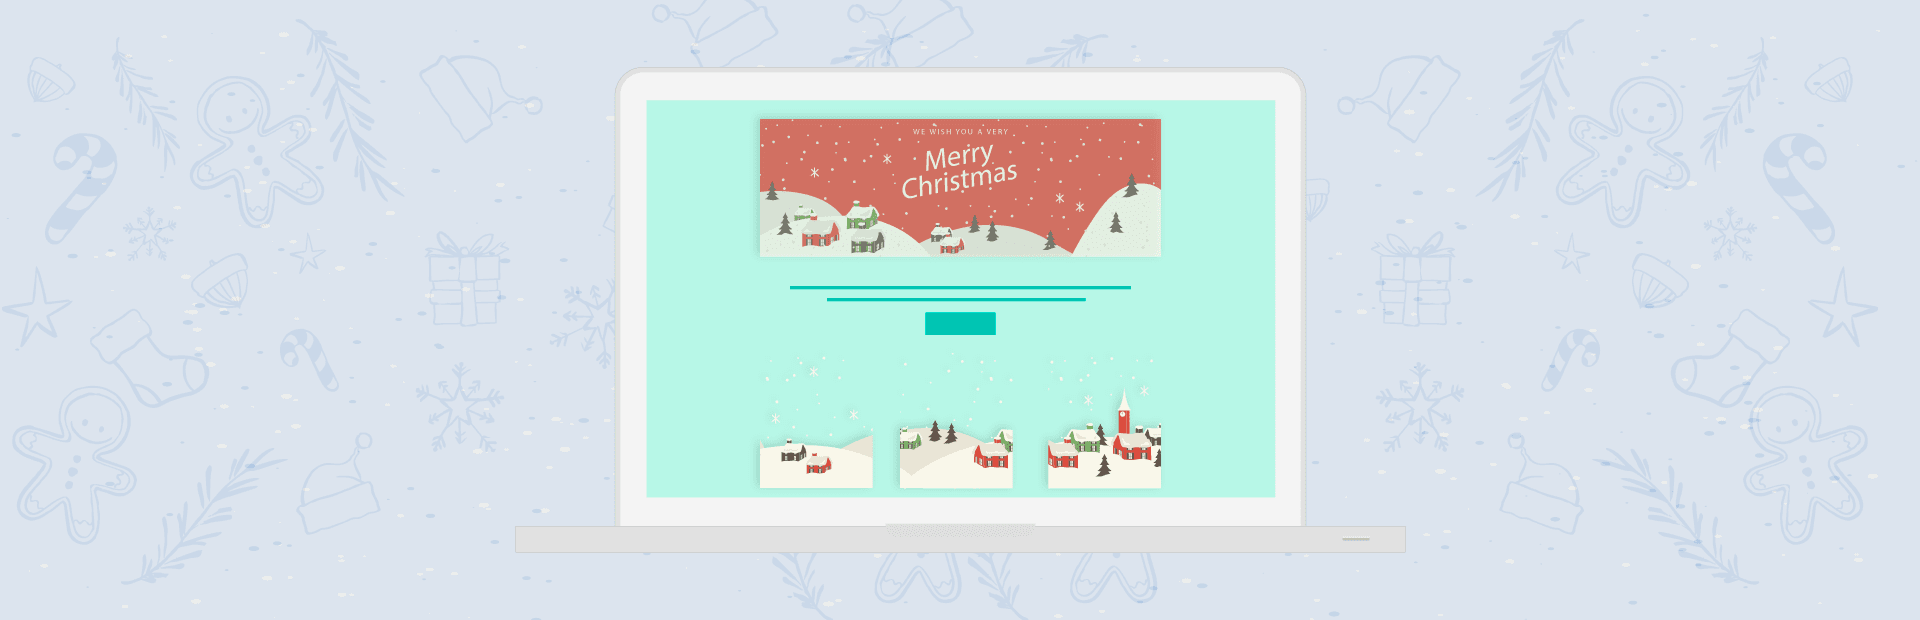 Christmas email marketing 2022-2023: guide with ideas and examples